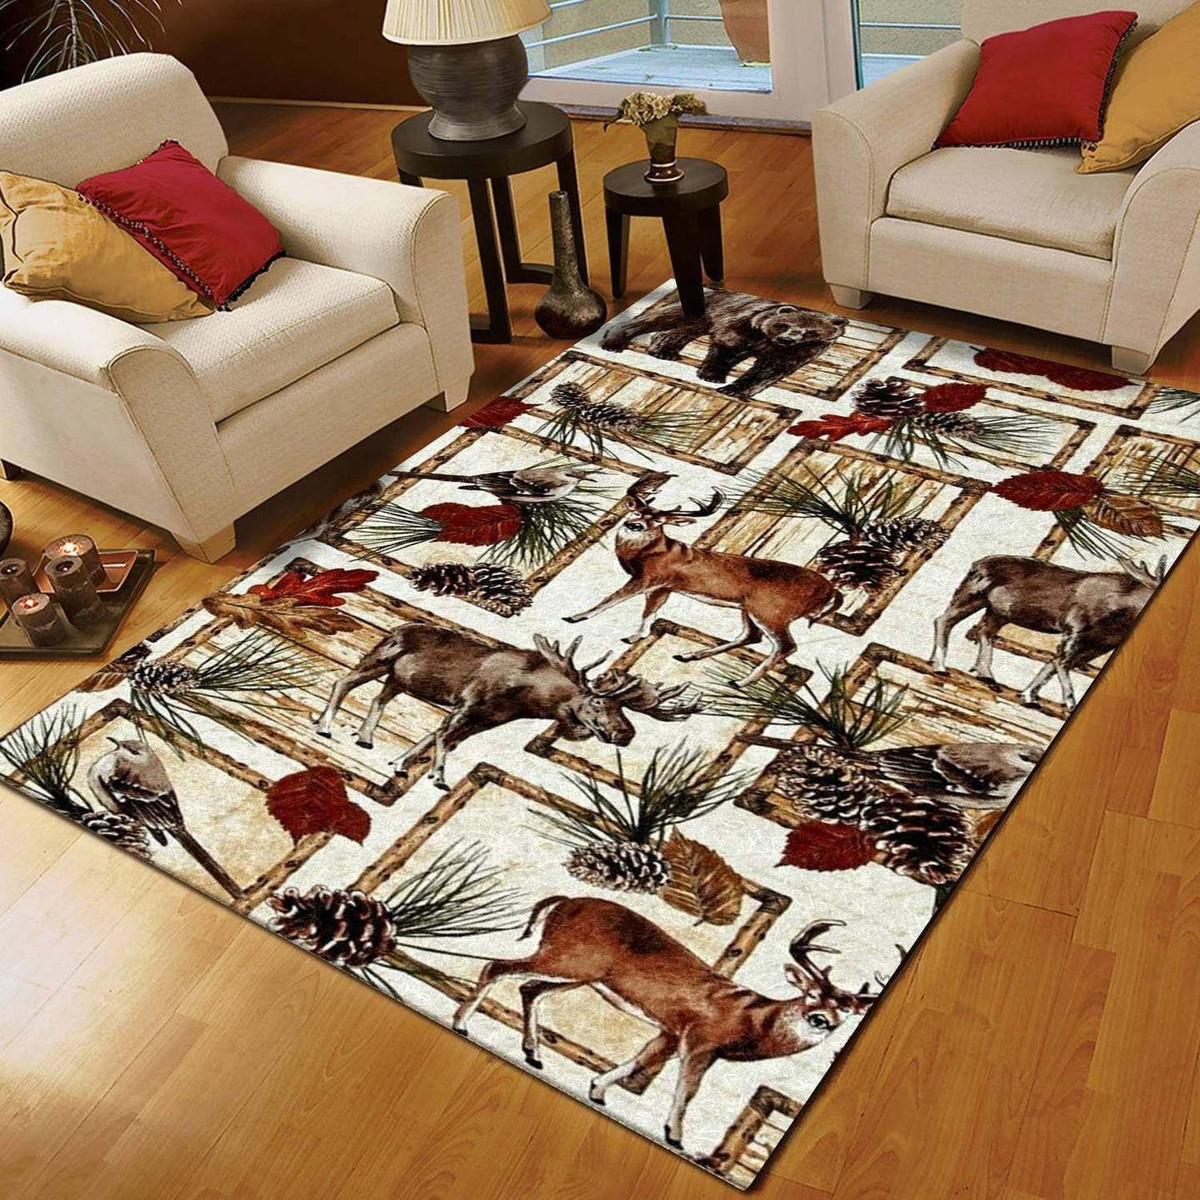 love-hunting-awesome-bni183-quilt